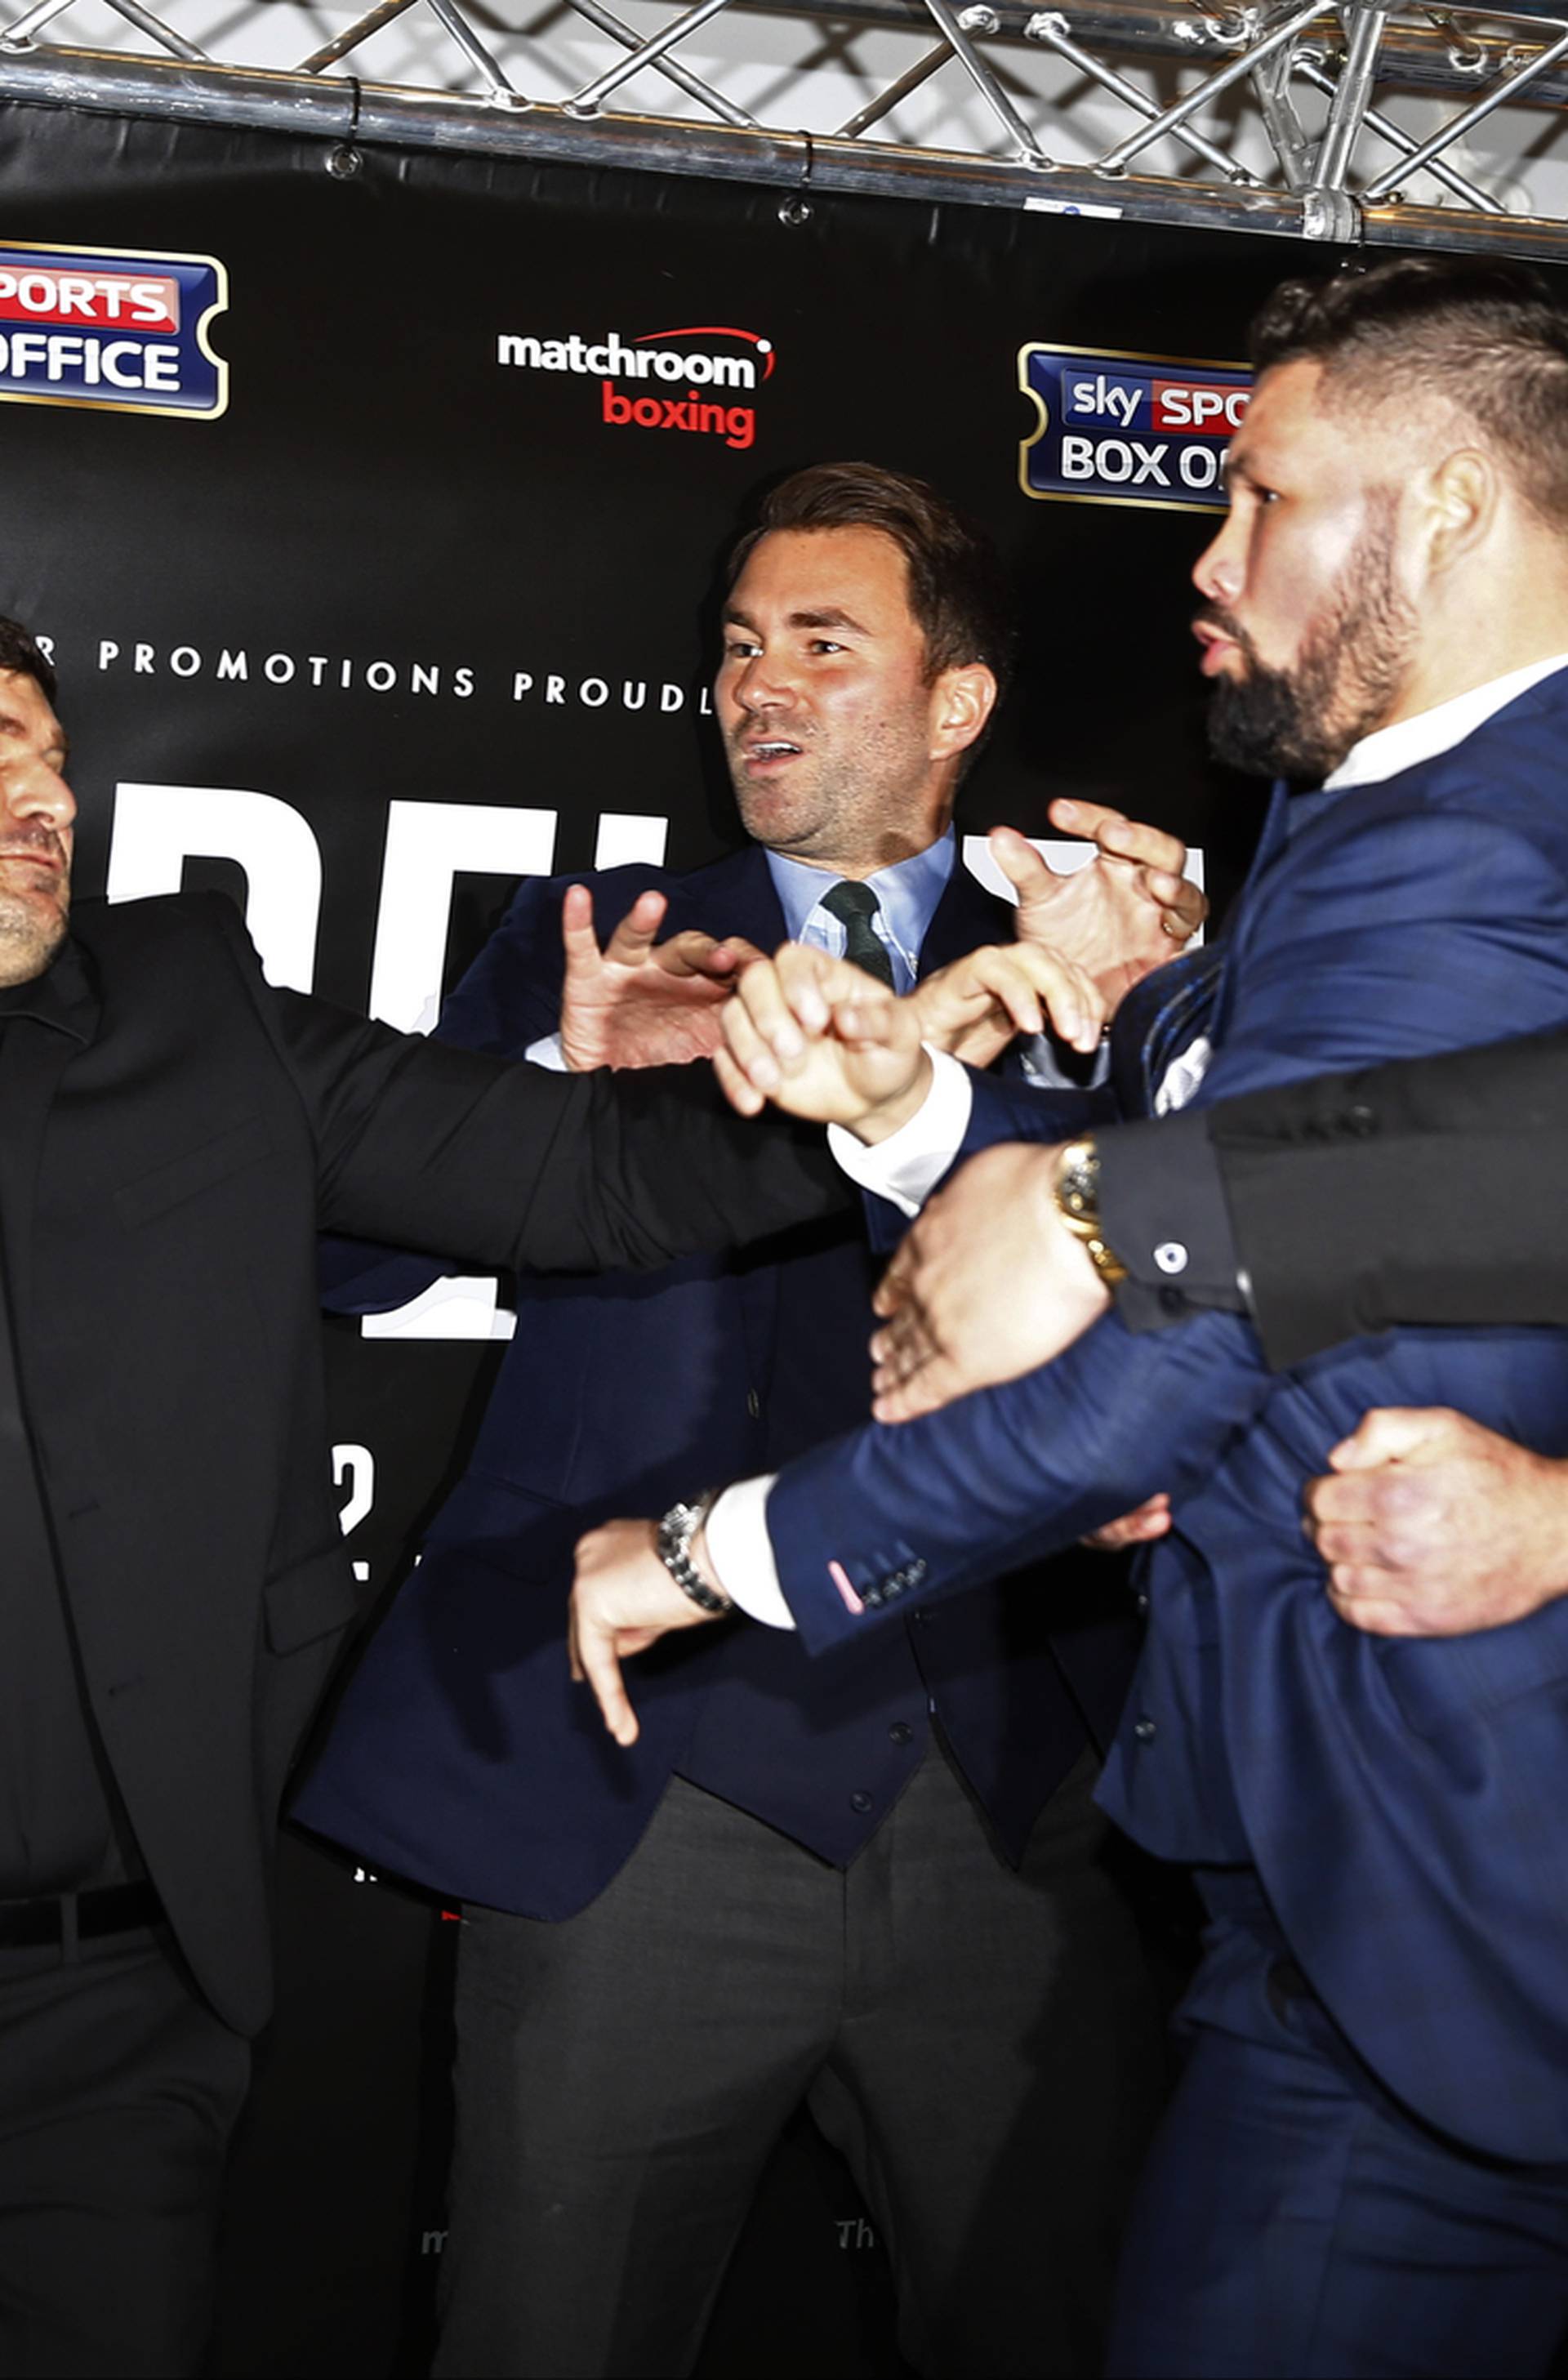 David Haye and Tony Bellew clash after the press conference as promoter Eddie Hearn looks on